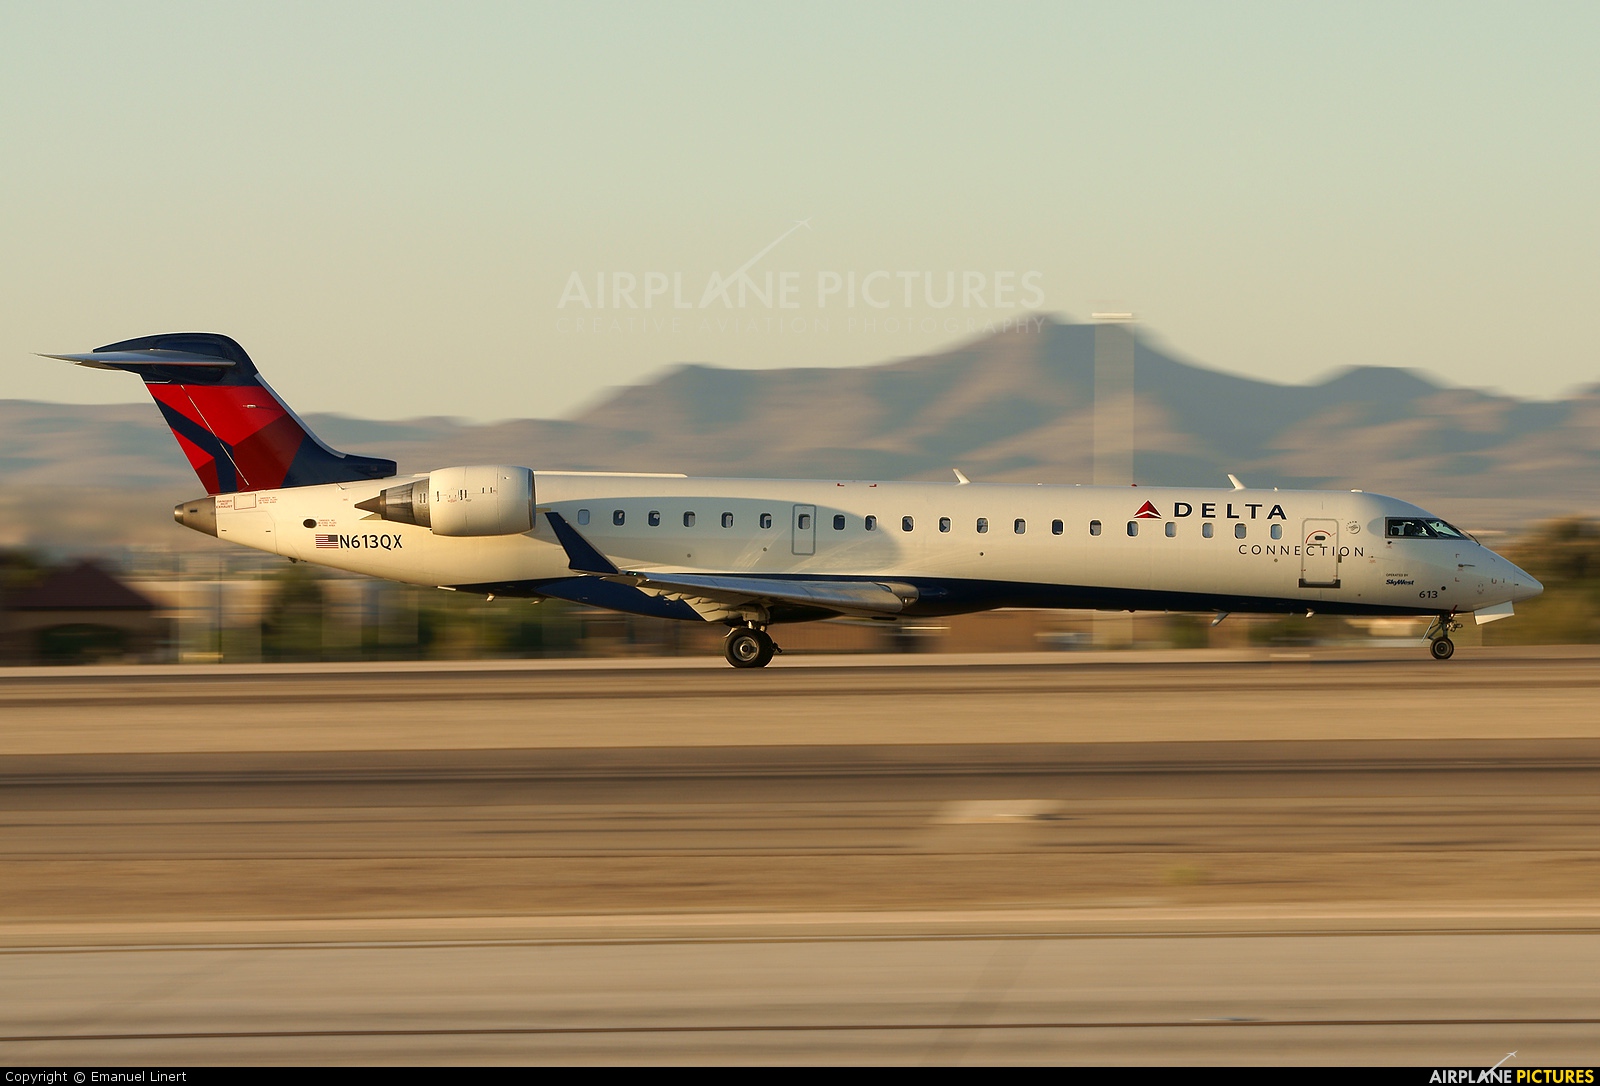 Delta Connection - SkyWest Airlines N613QX aircraft at Las Vegas - McCarran Intl